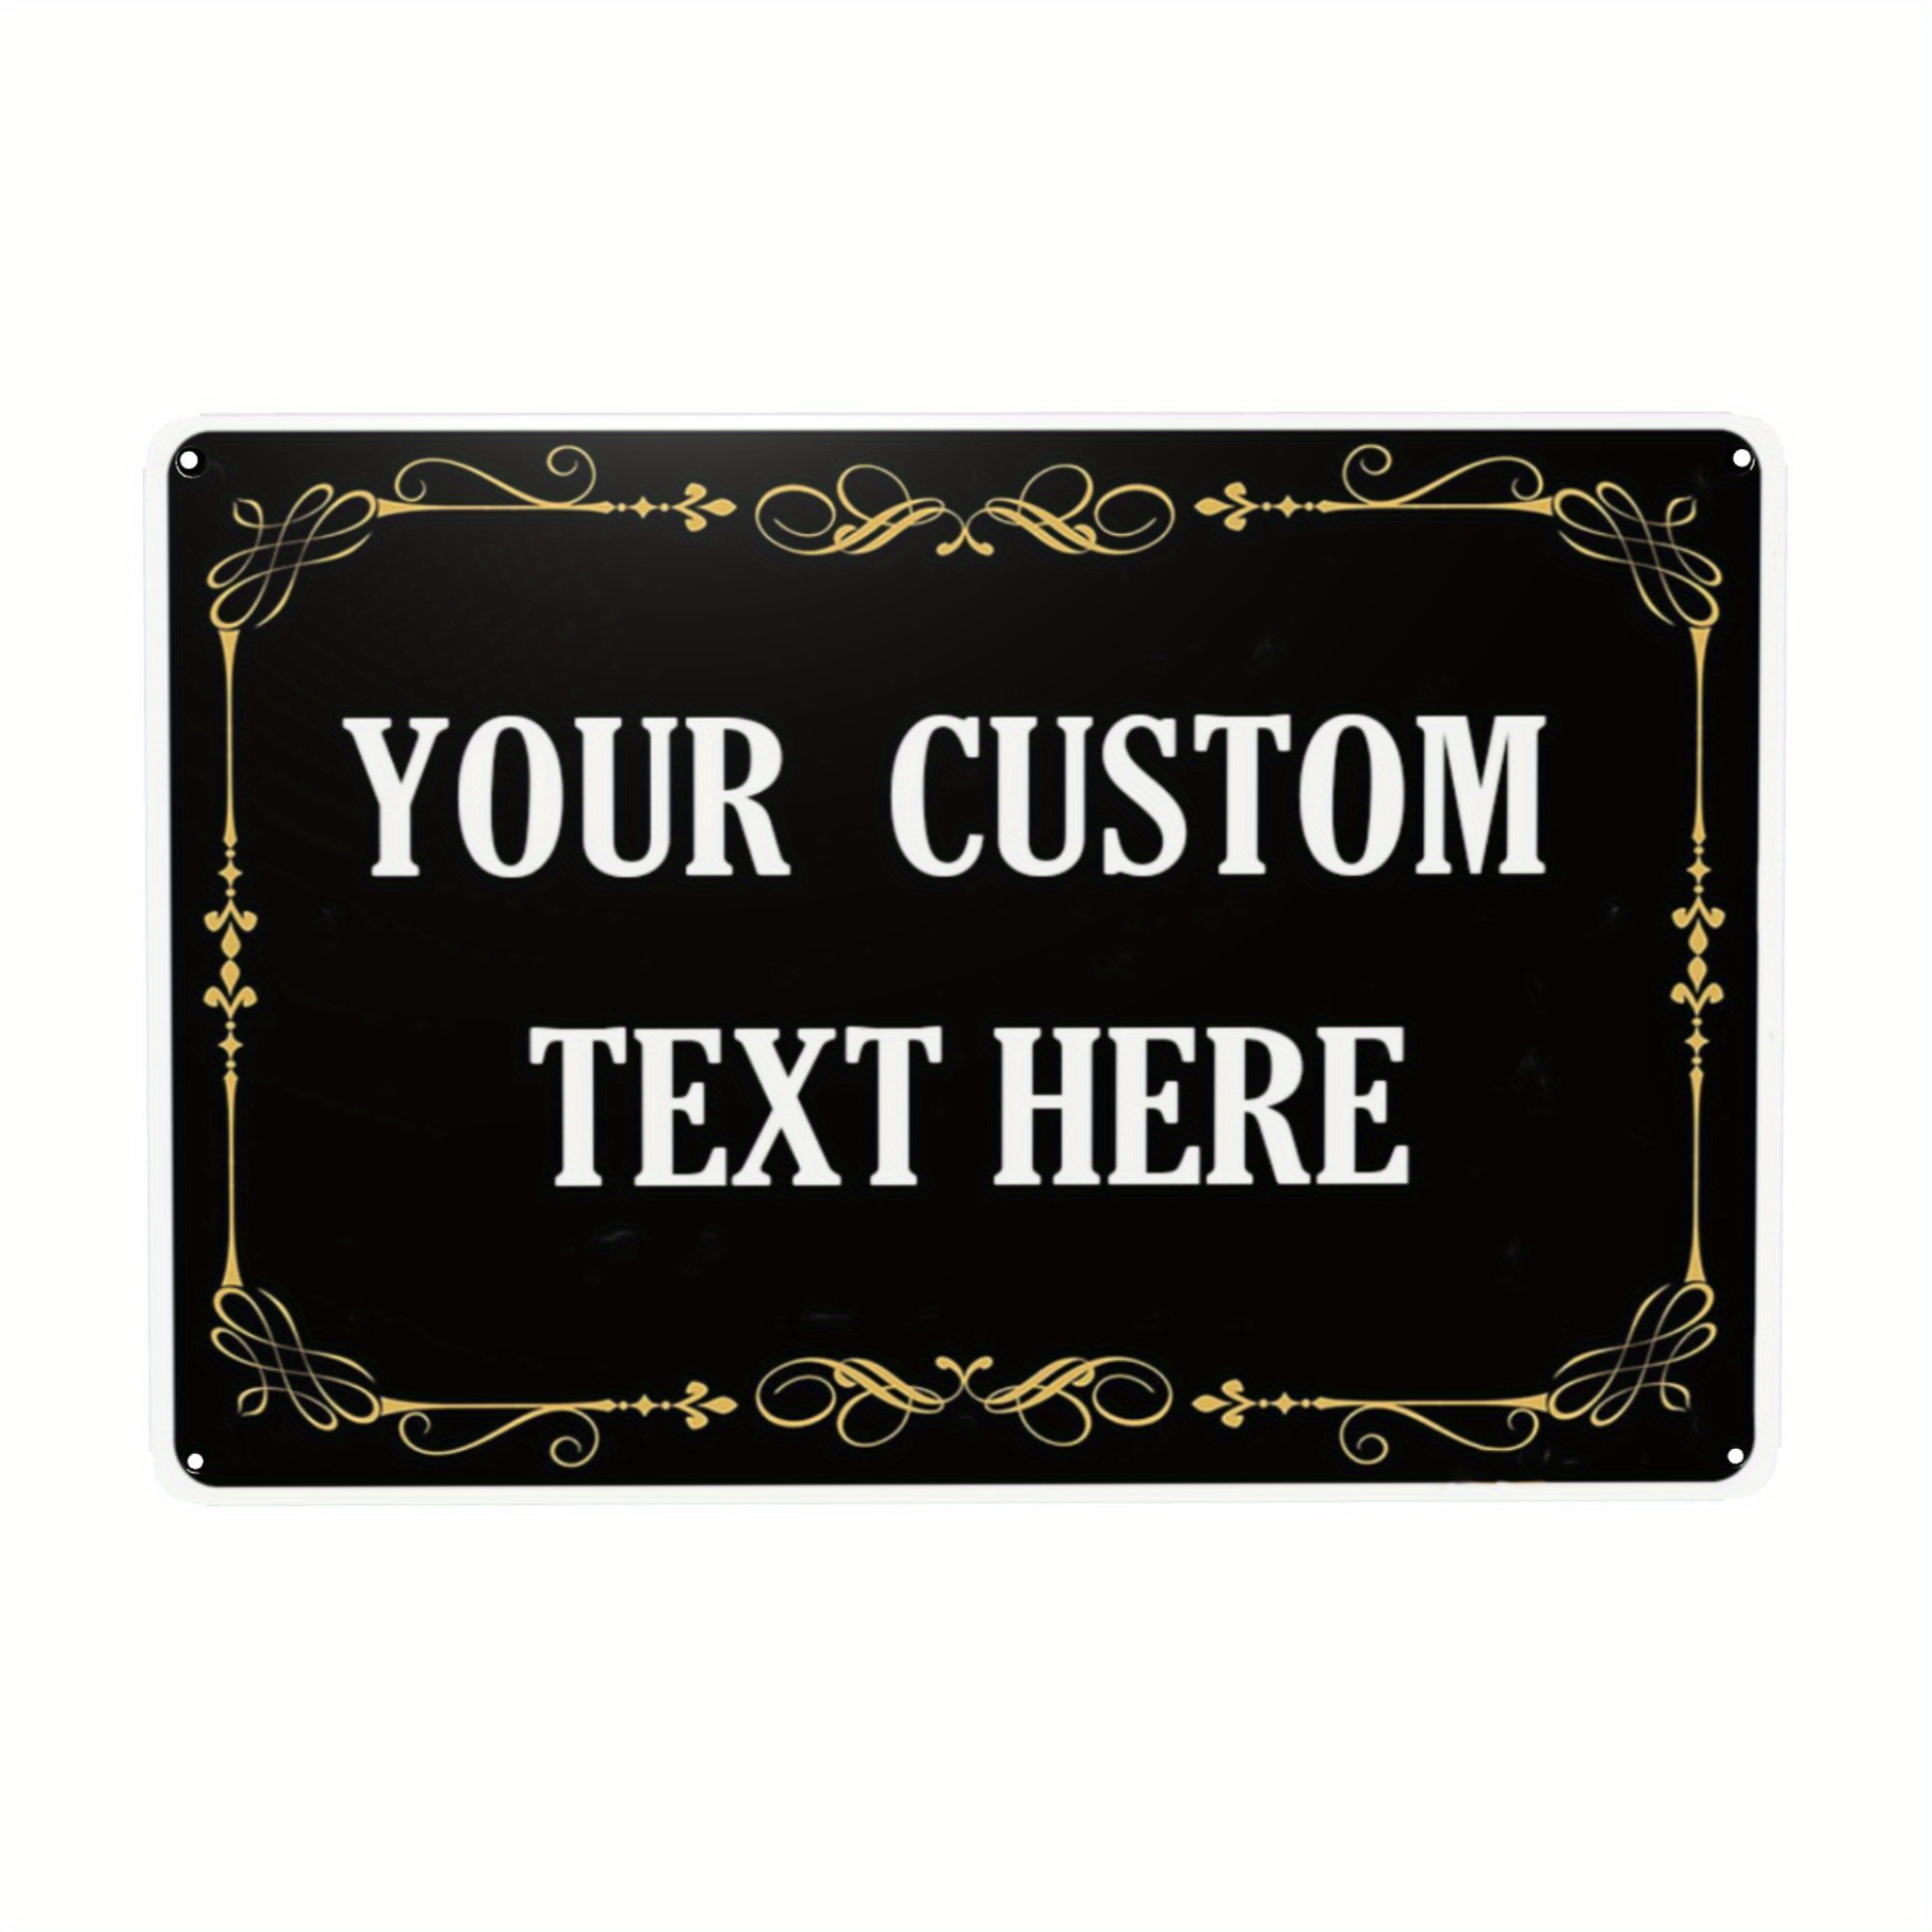 

Custom Text Metal Sign - Personalized Vintage Wall Art, Waterproof & Non-glare, Perfect For Home Office, For Man Cave, Or Garden Decor, 12x8 Inches